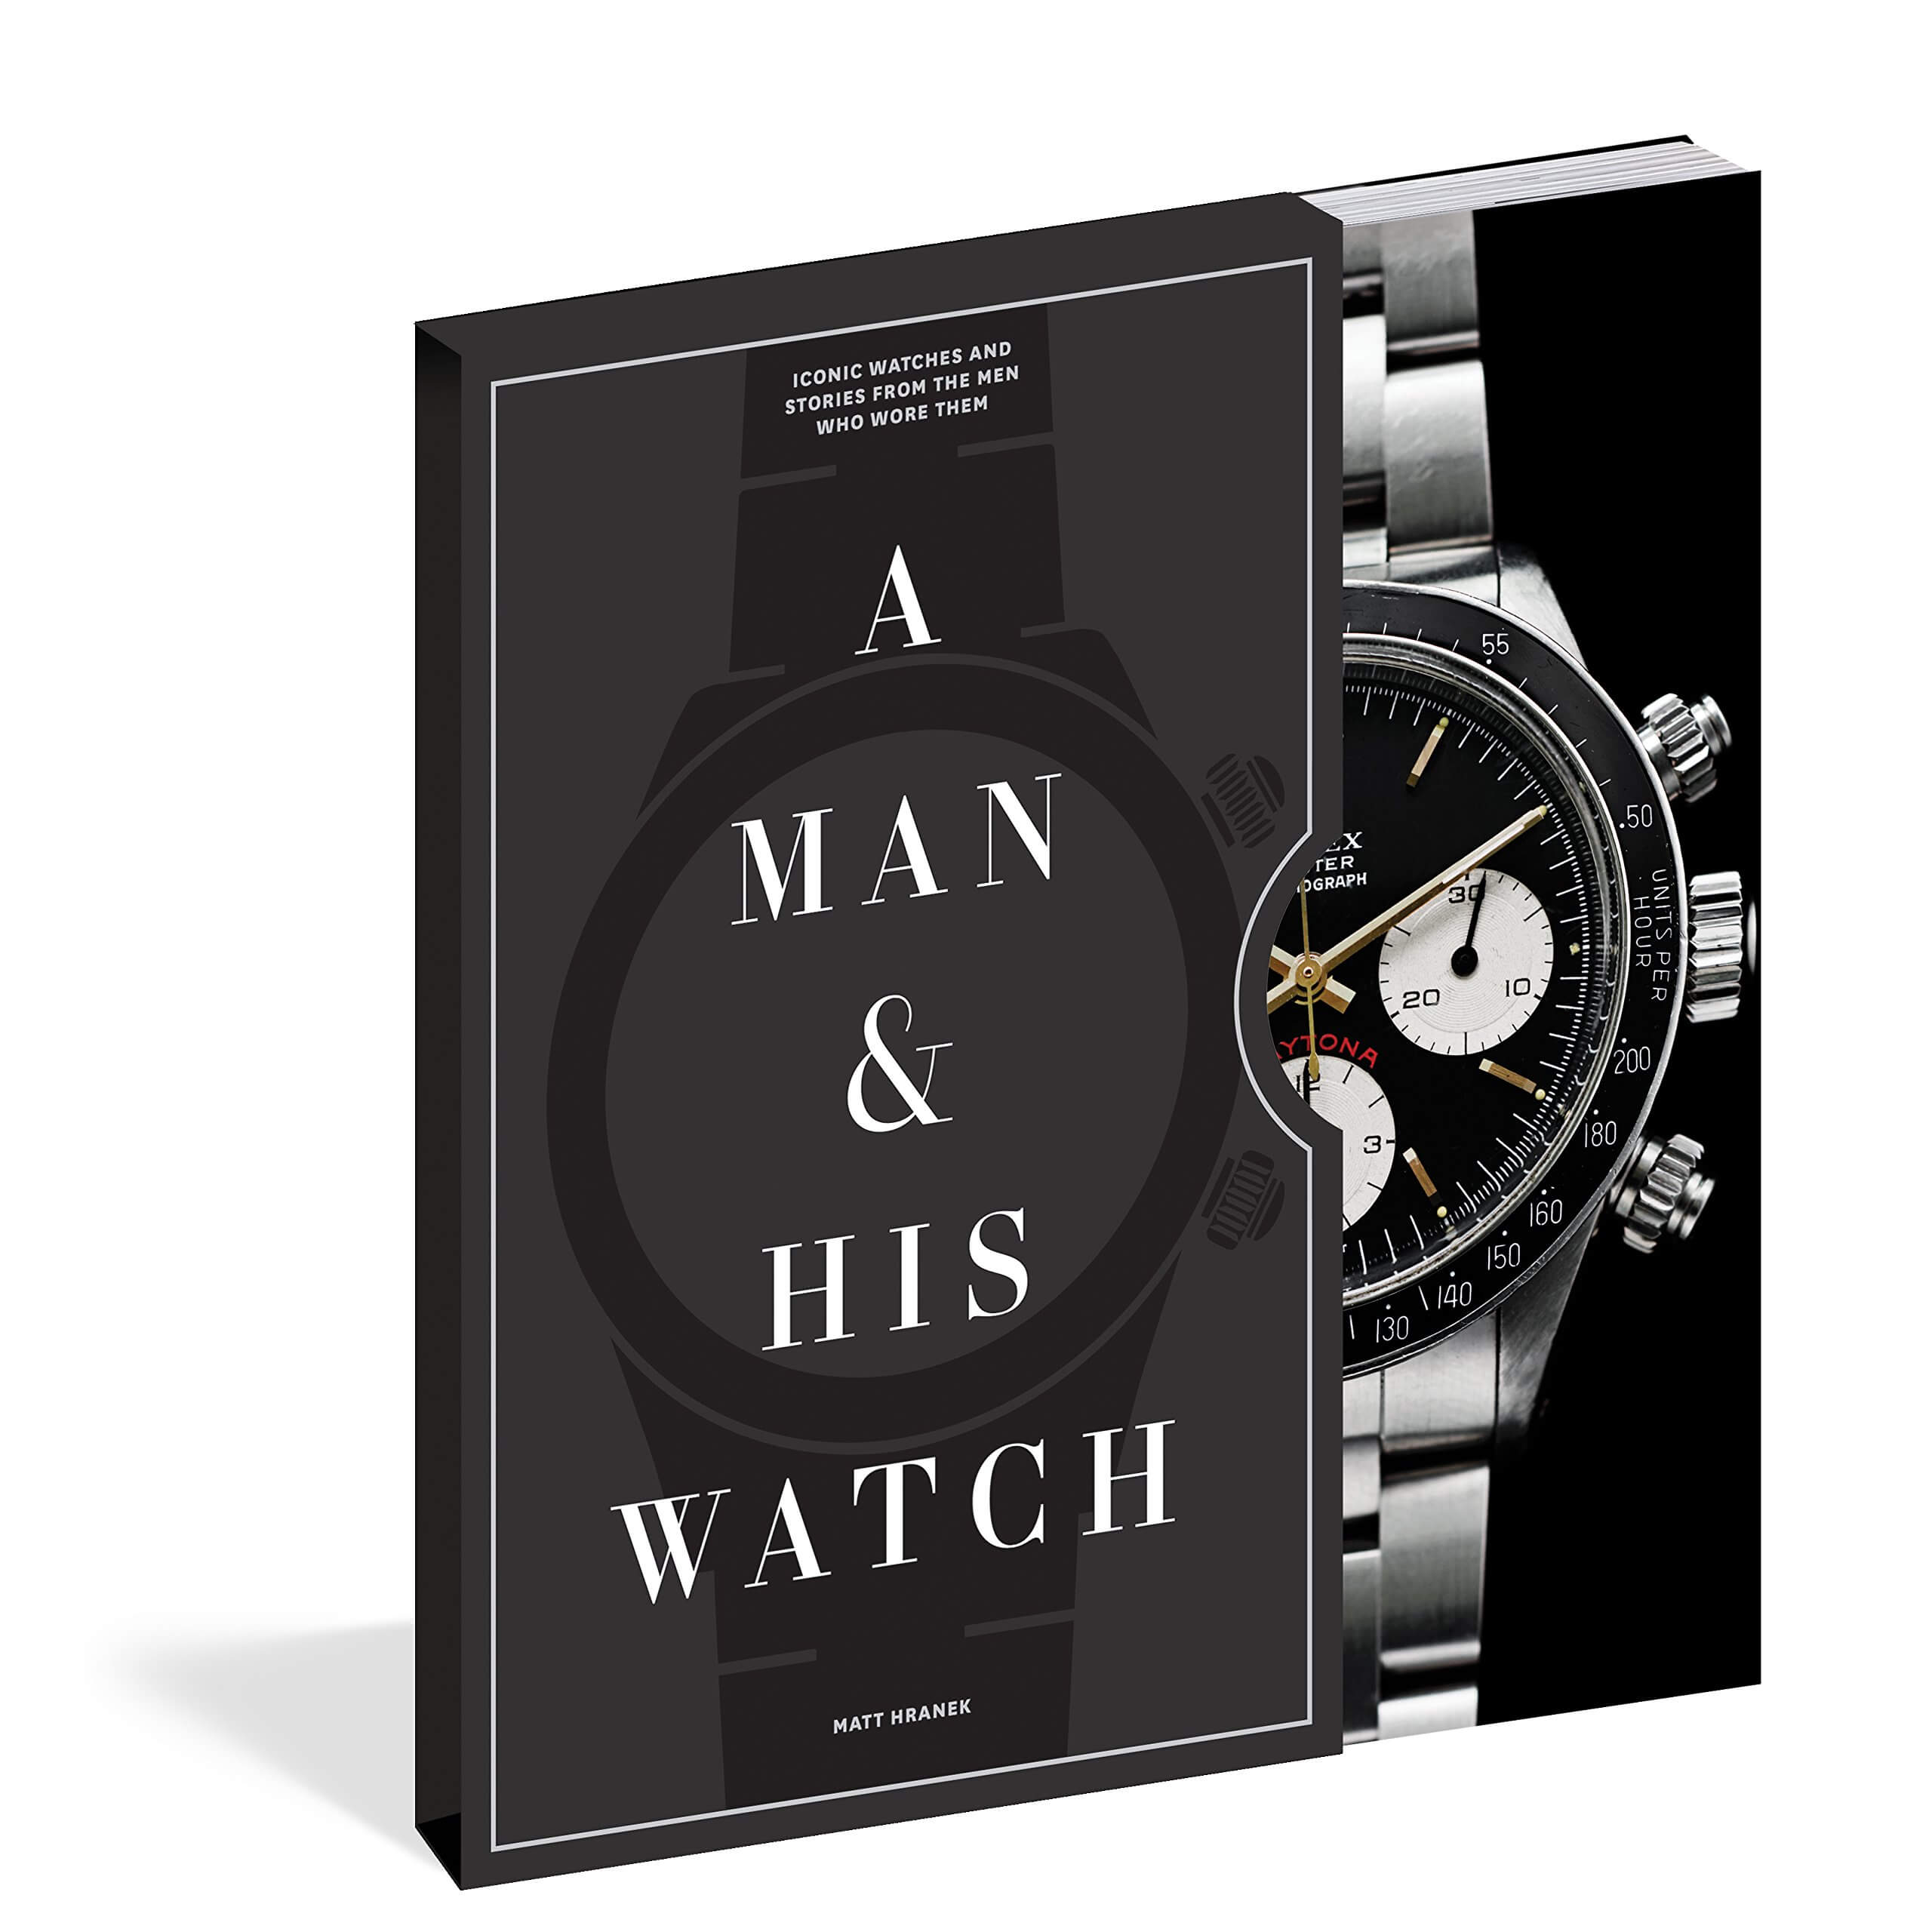 Black Book with White Lettering with a Rolex Popping Out, Written by Matt Hranek 